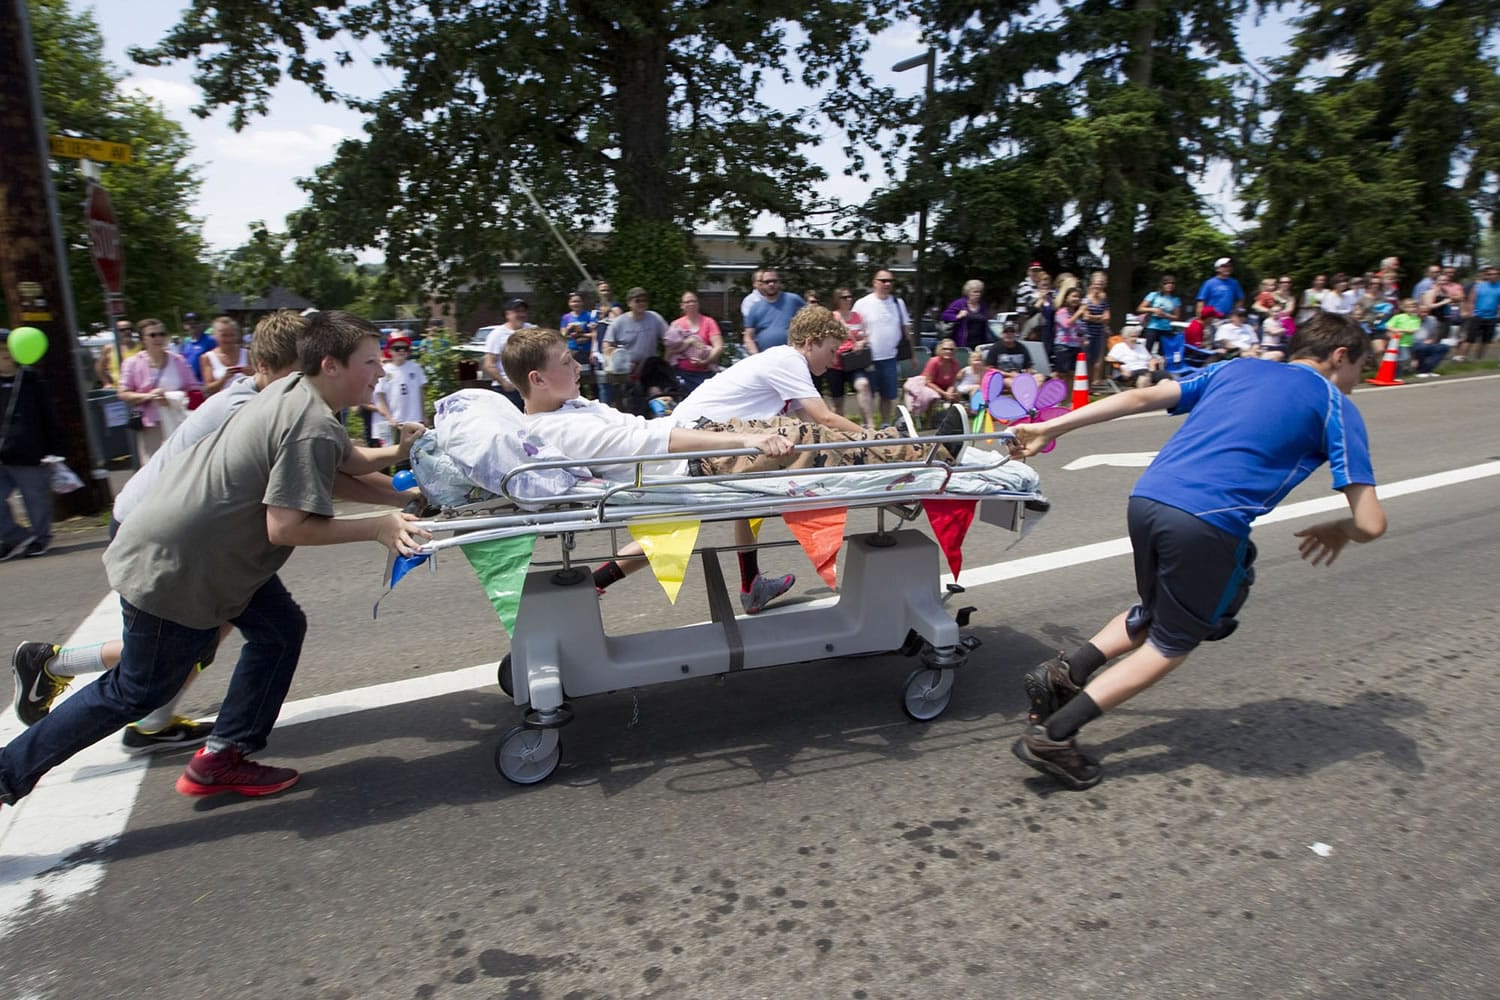 A group of boys takes part in the bed races at Hockinson Fun Days, which will be held May 29-30.